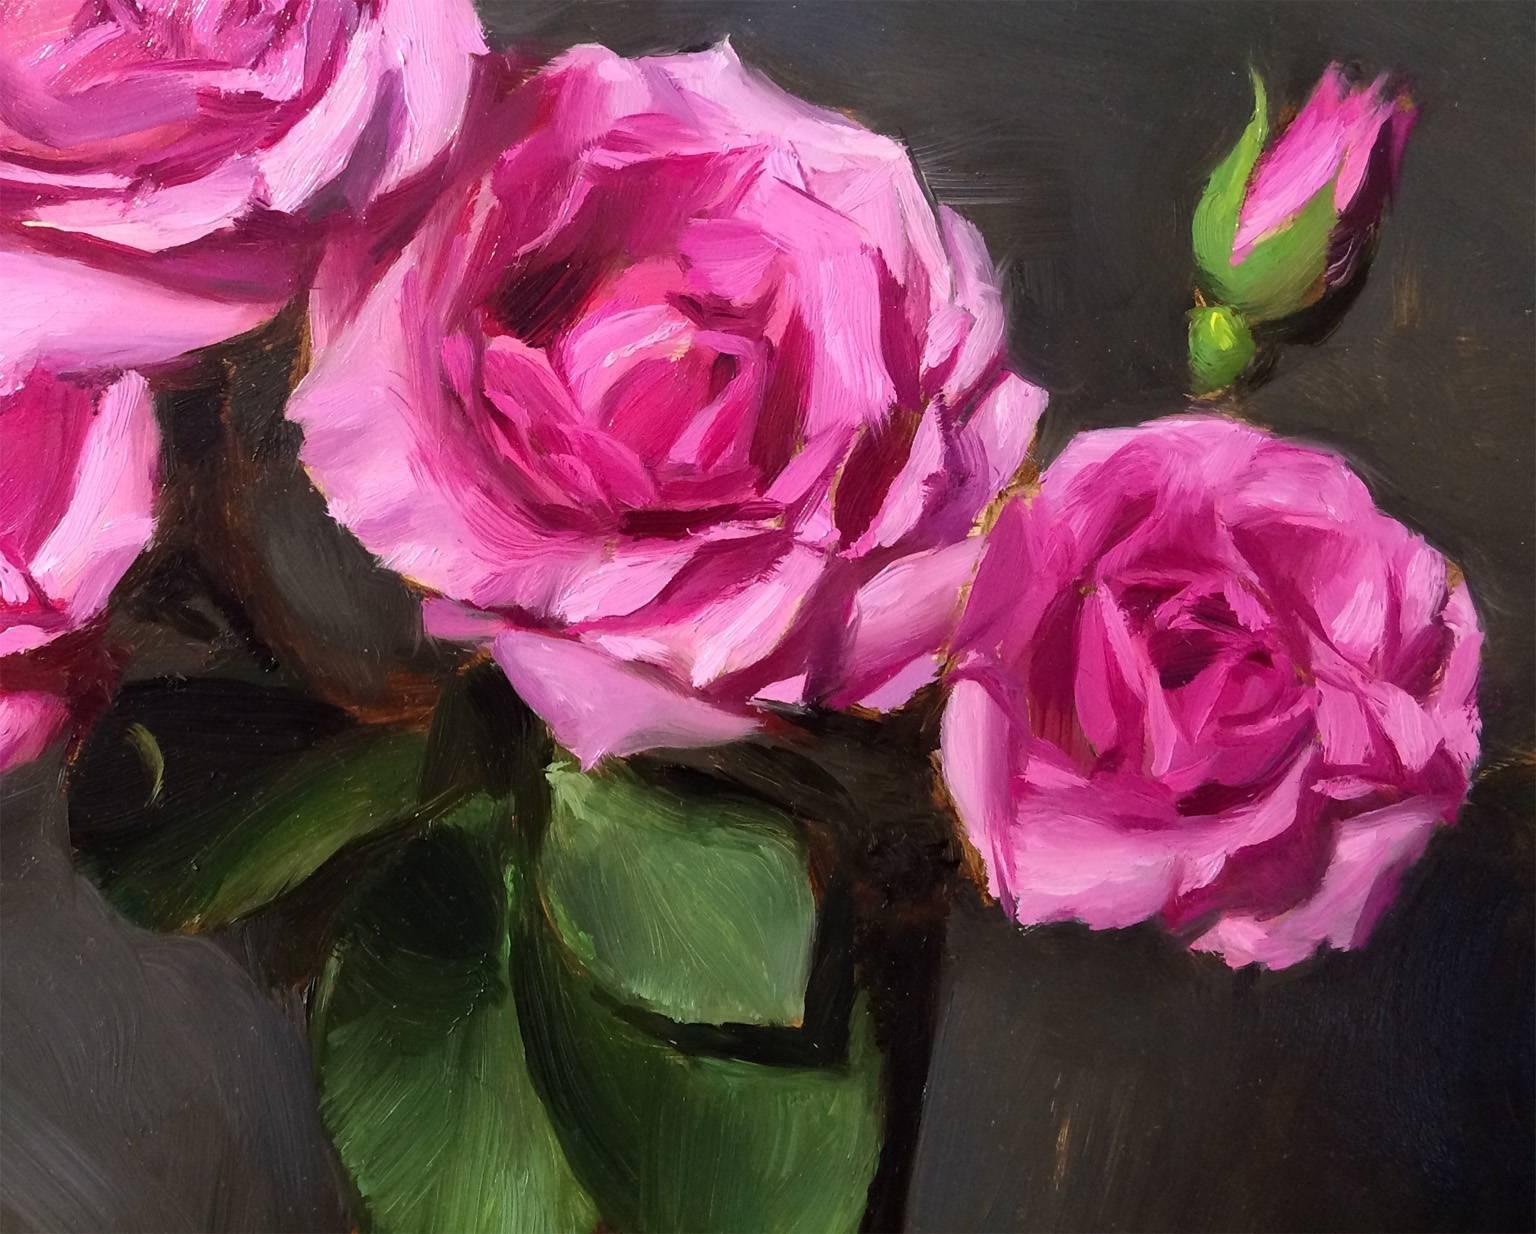 Roses blooming in a simple bronze vase is the center Pink Spray. With pinks ranging from pale pink to bright fuchsia and a background of blues and greys, Daily creates a classic still-life that will brighten your wall. 

Joseph has been making